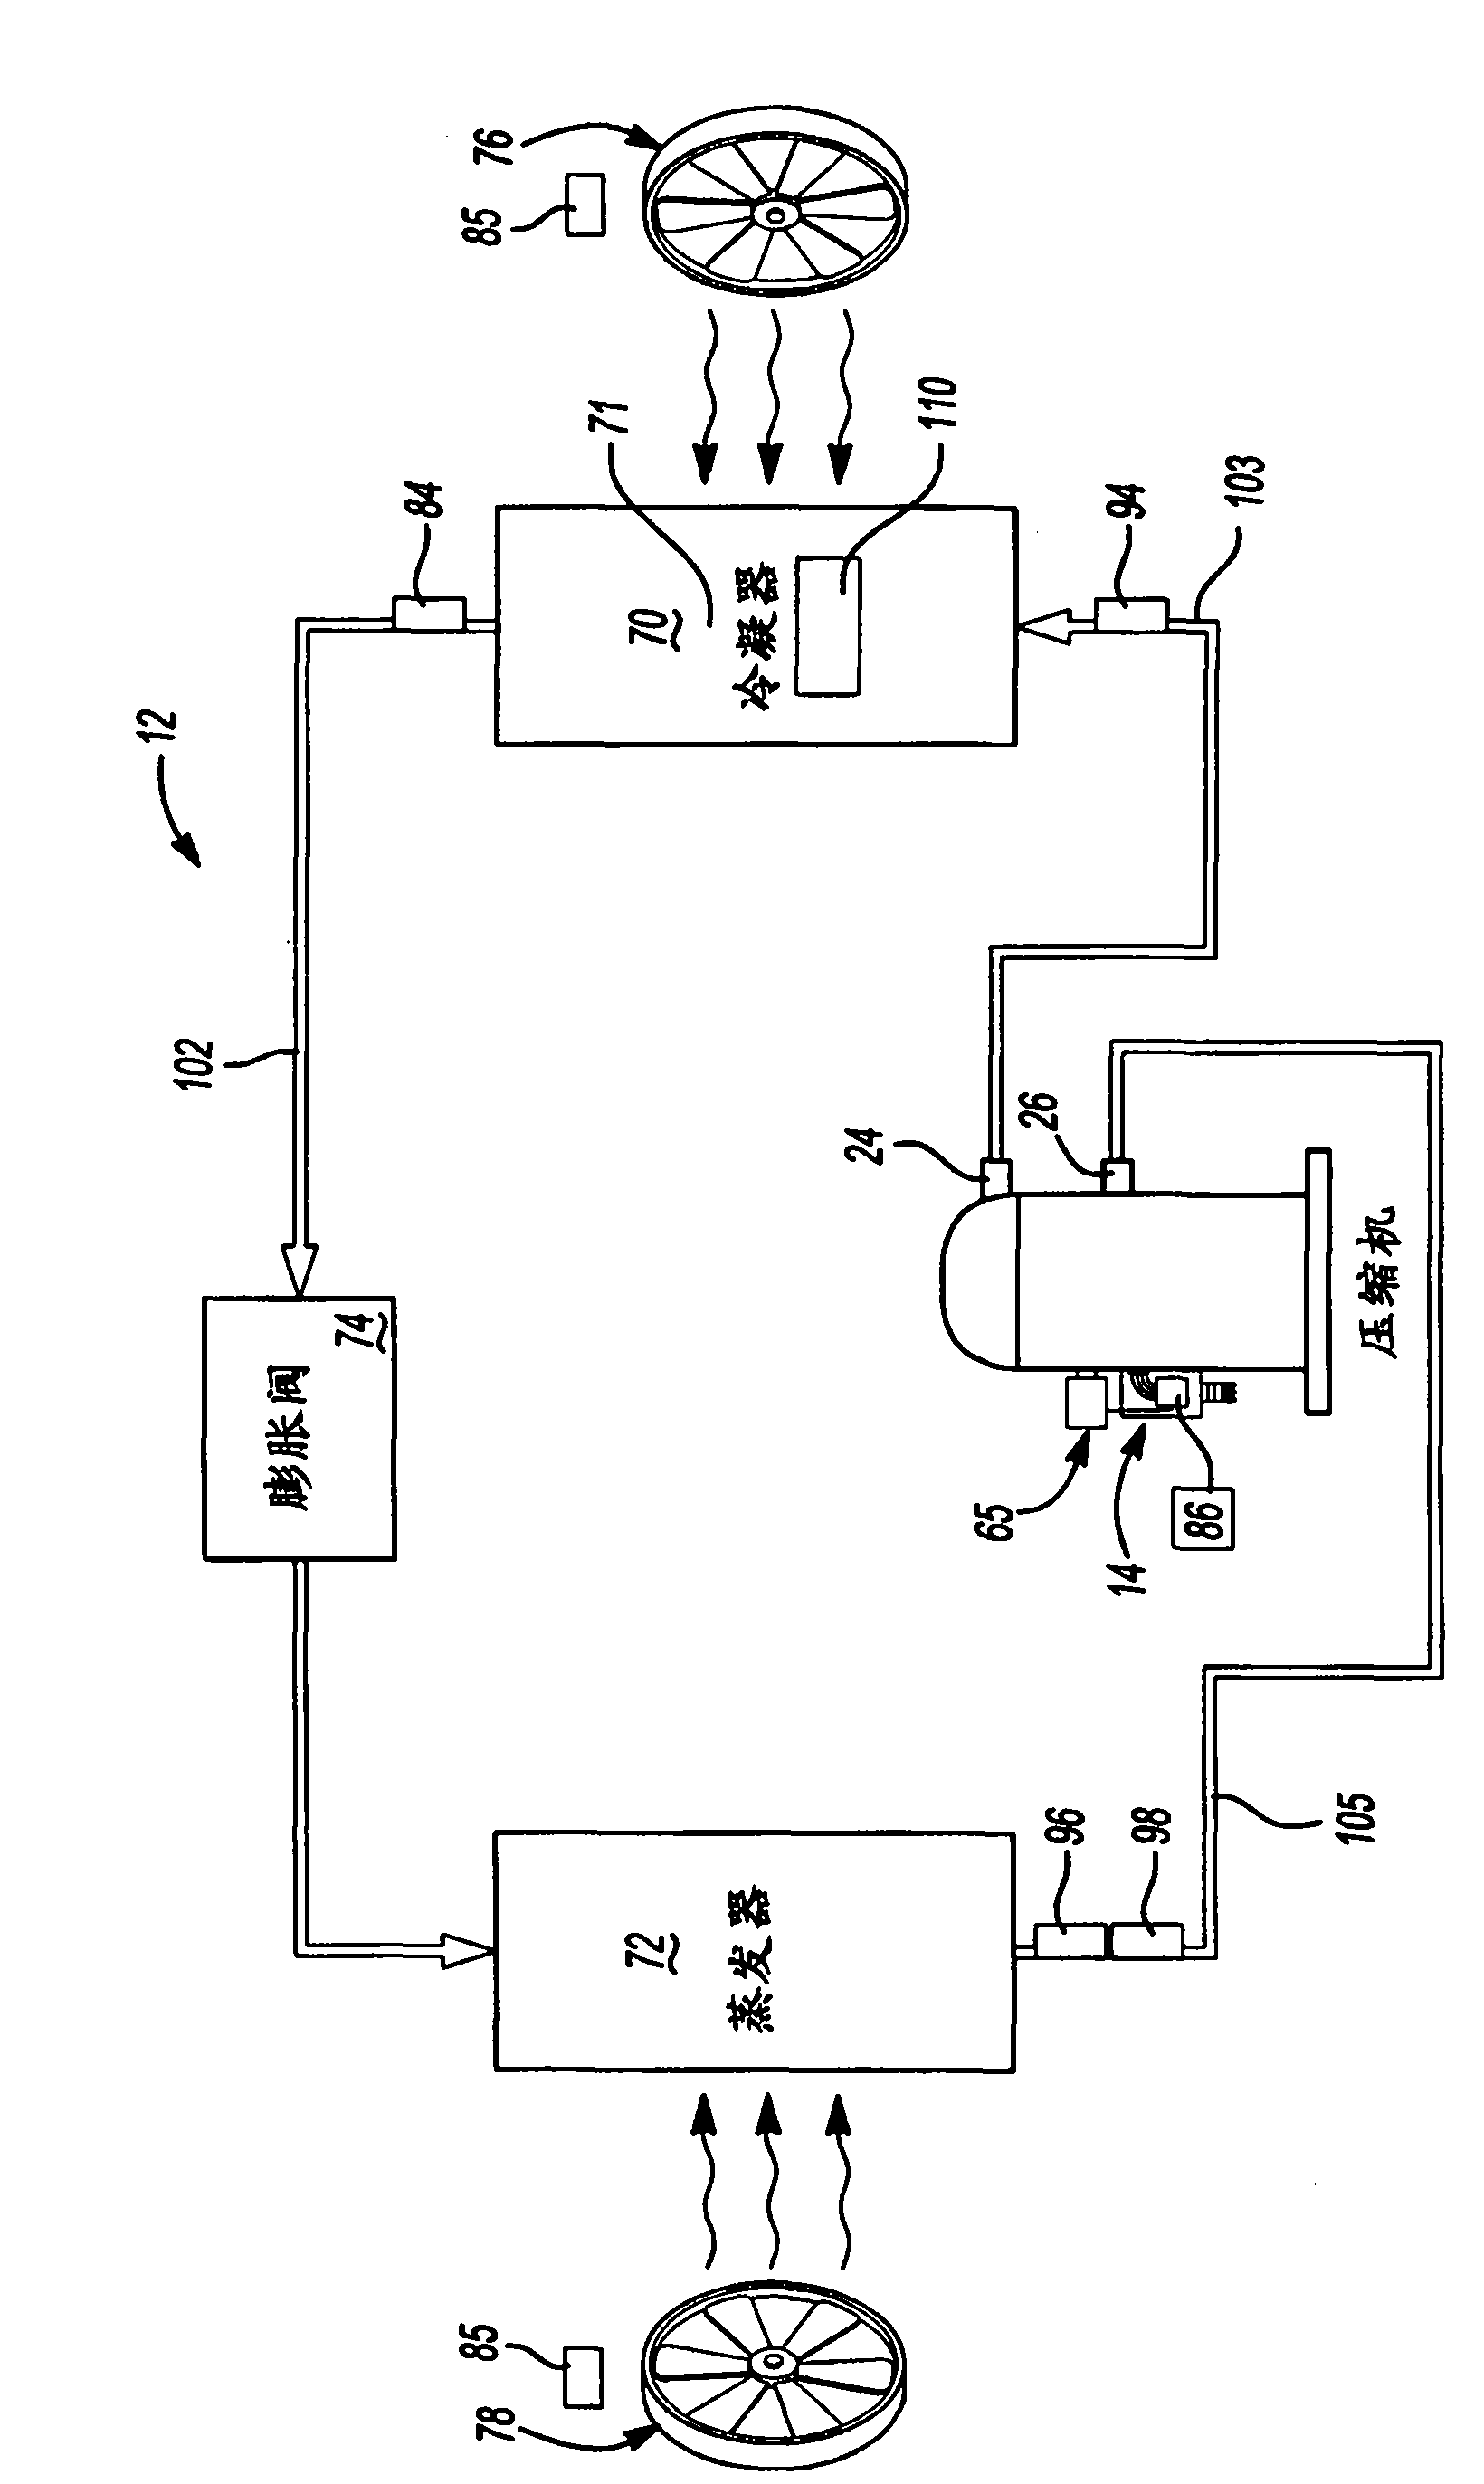 Refrigeration monitoring system and method